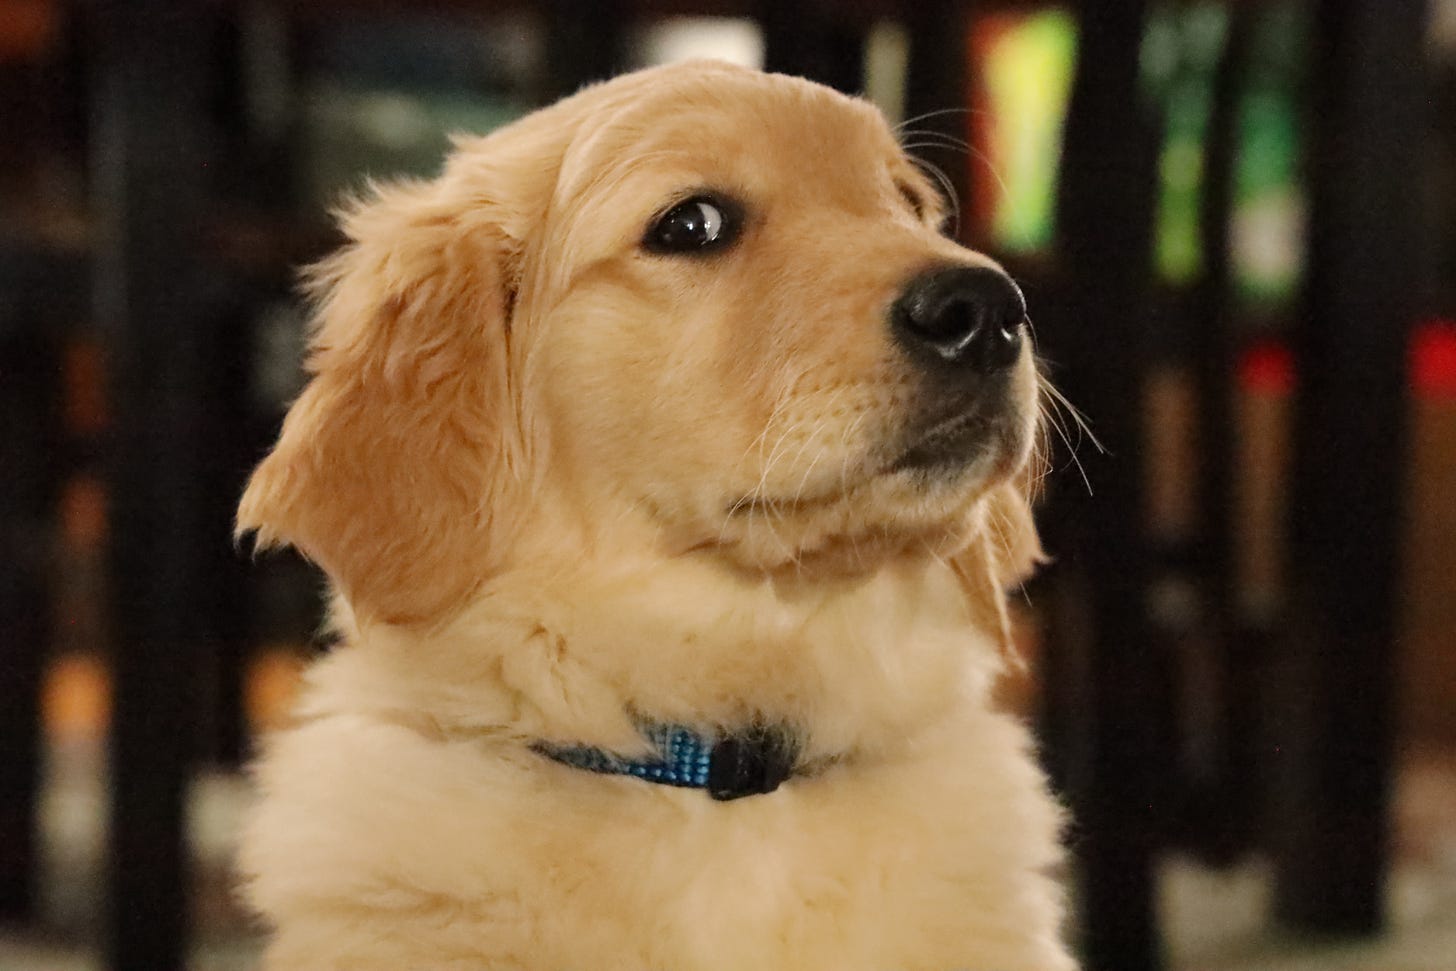 A golden retriever puppy with a look of what seems like mortification in its eyes